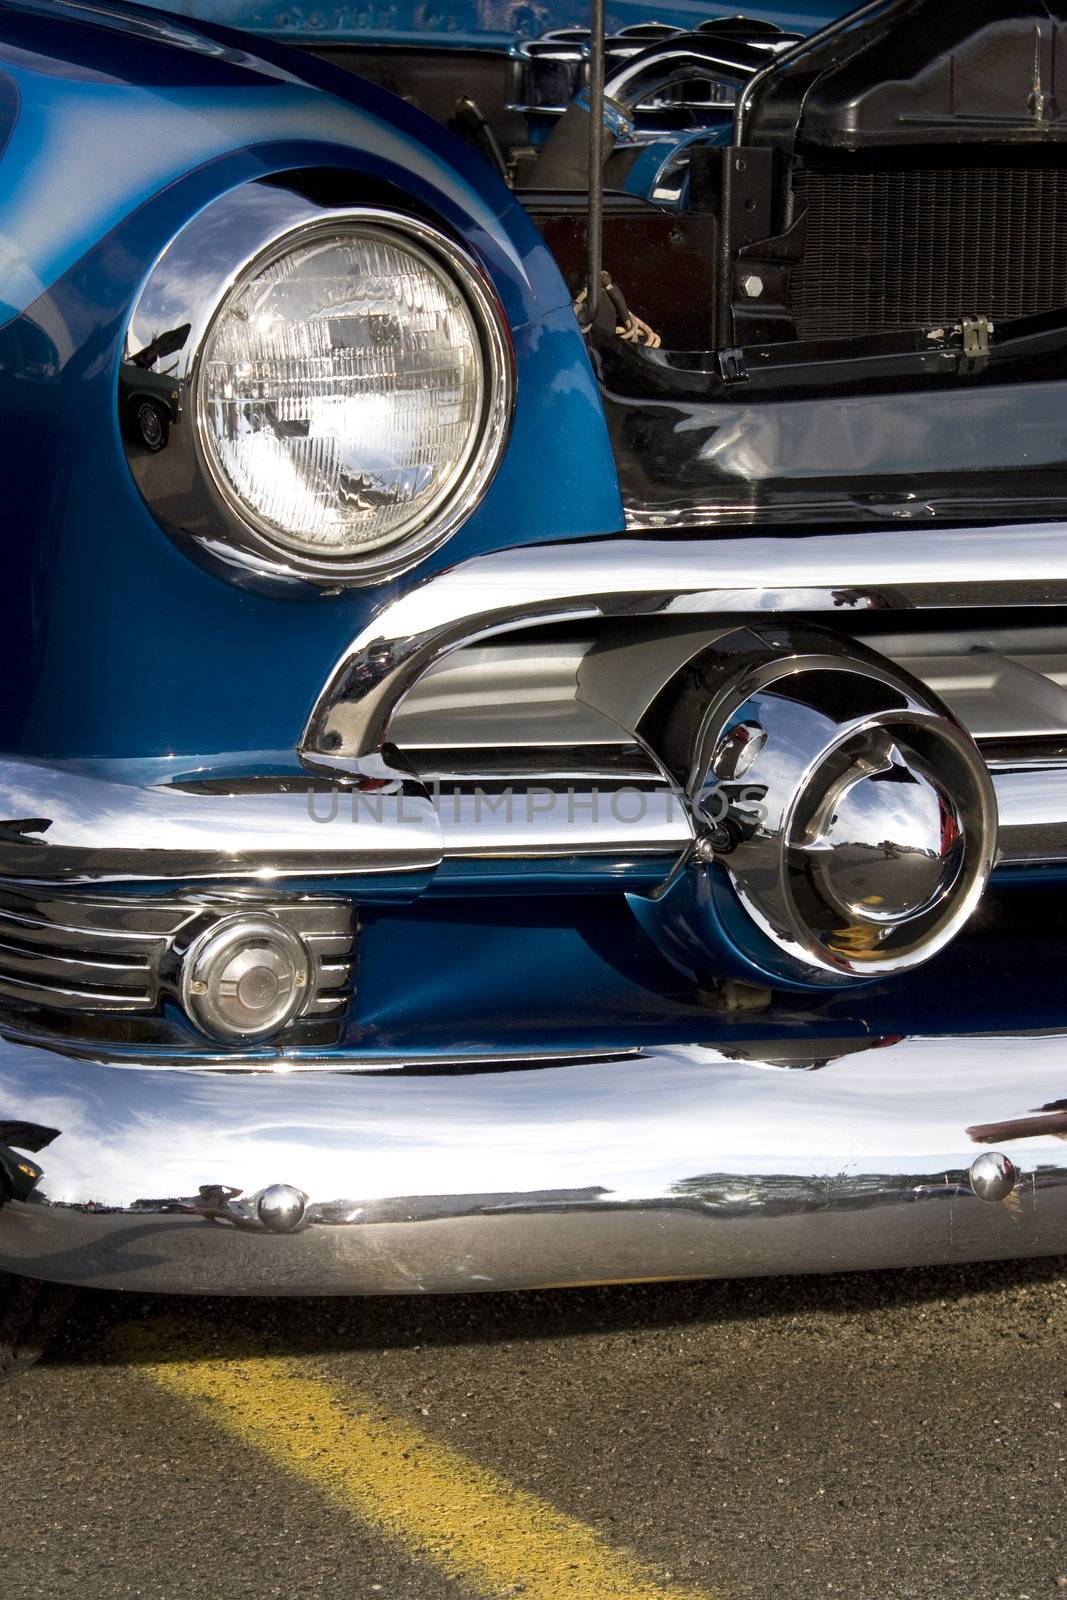 A closeup of the headlight and front bumper on a vintage car.